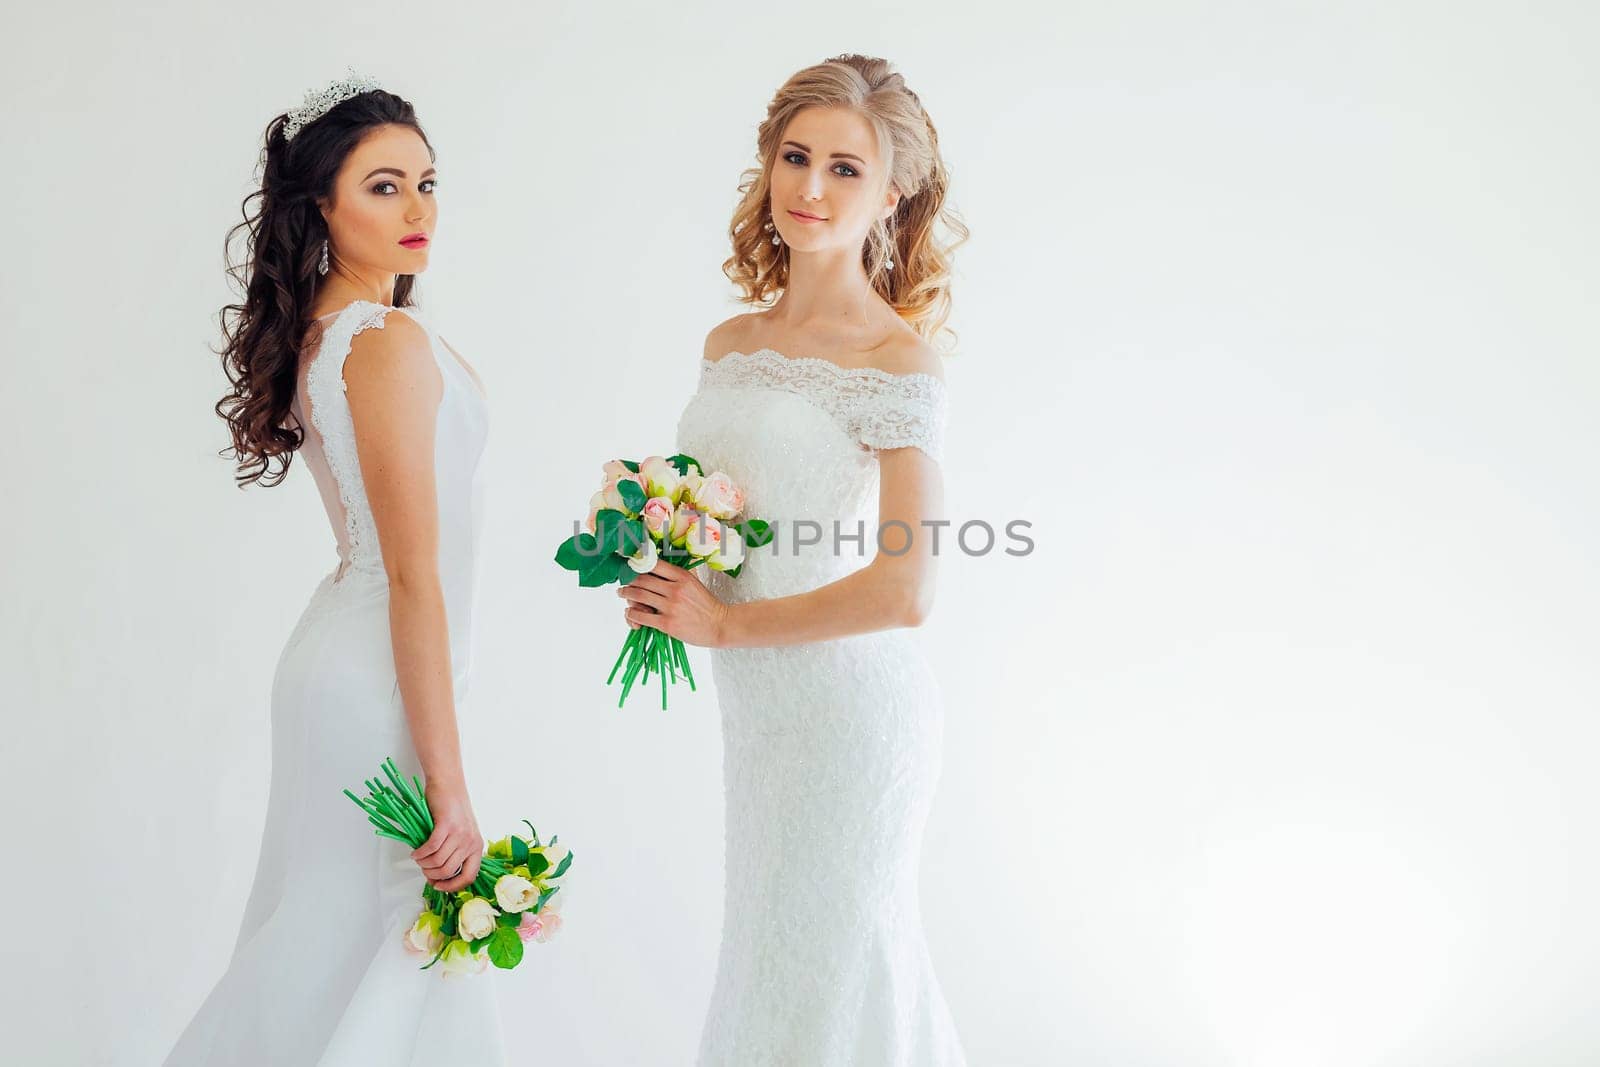 two wedding bride with bouquet wedding white by Simakov